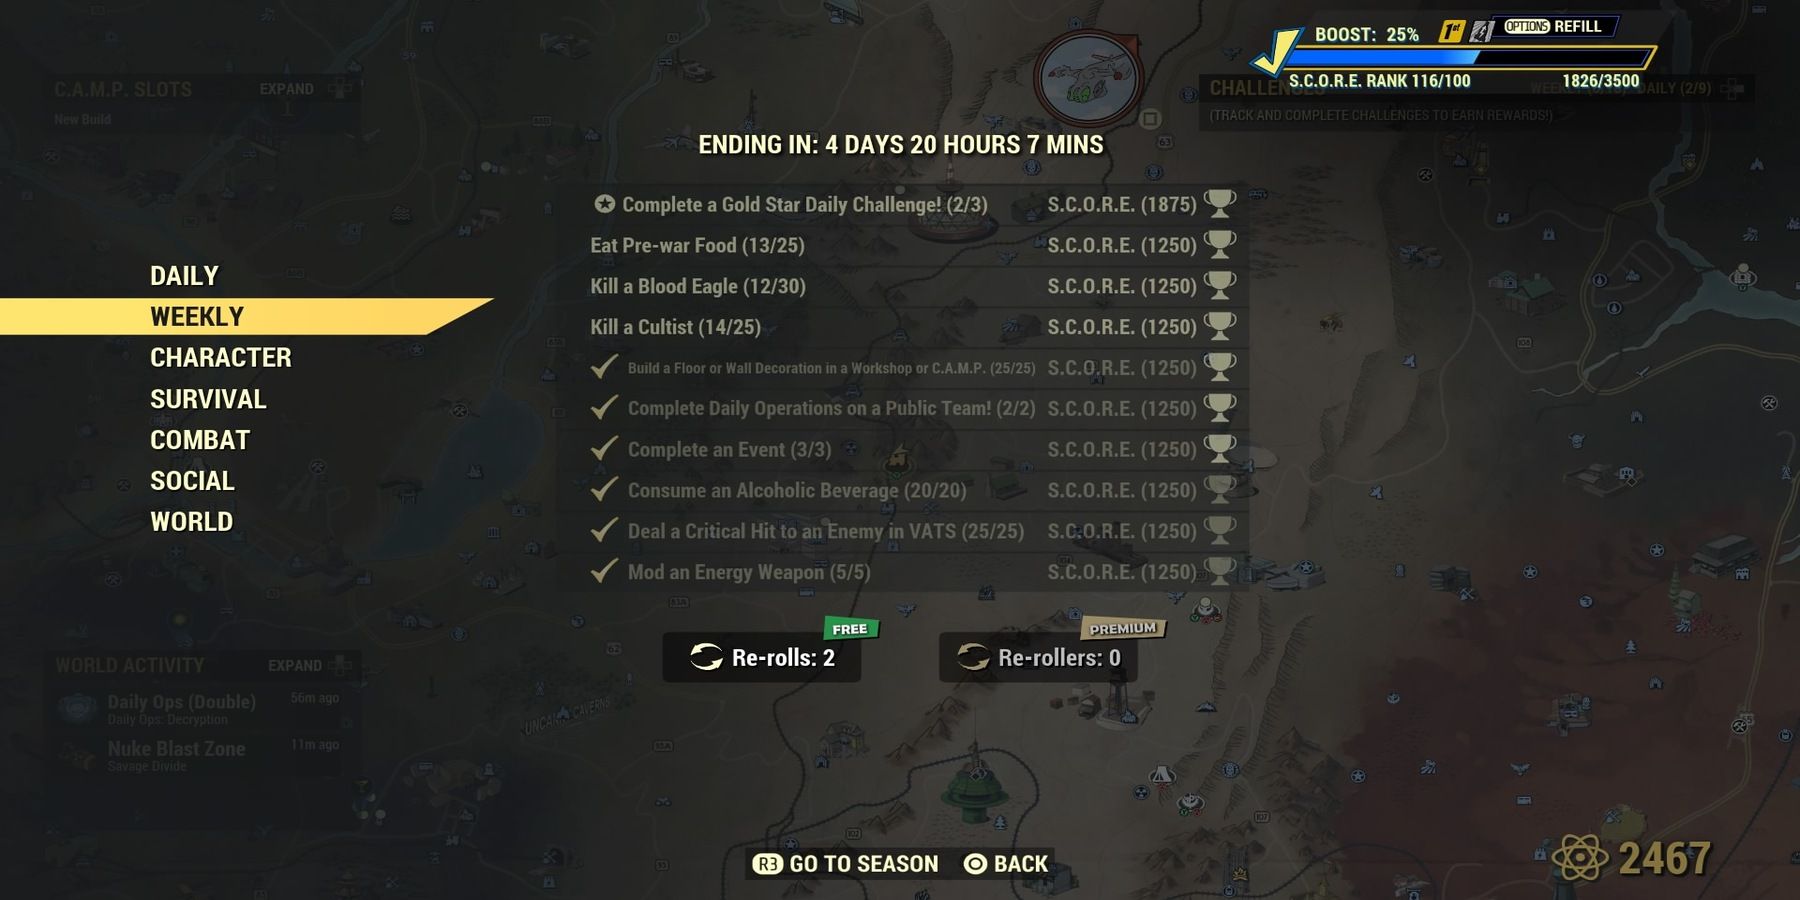 Weekly Challenges in Fallout 76